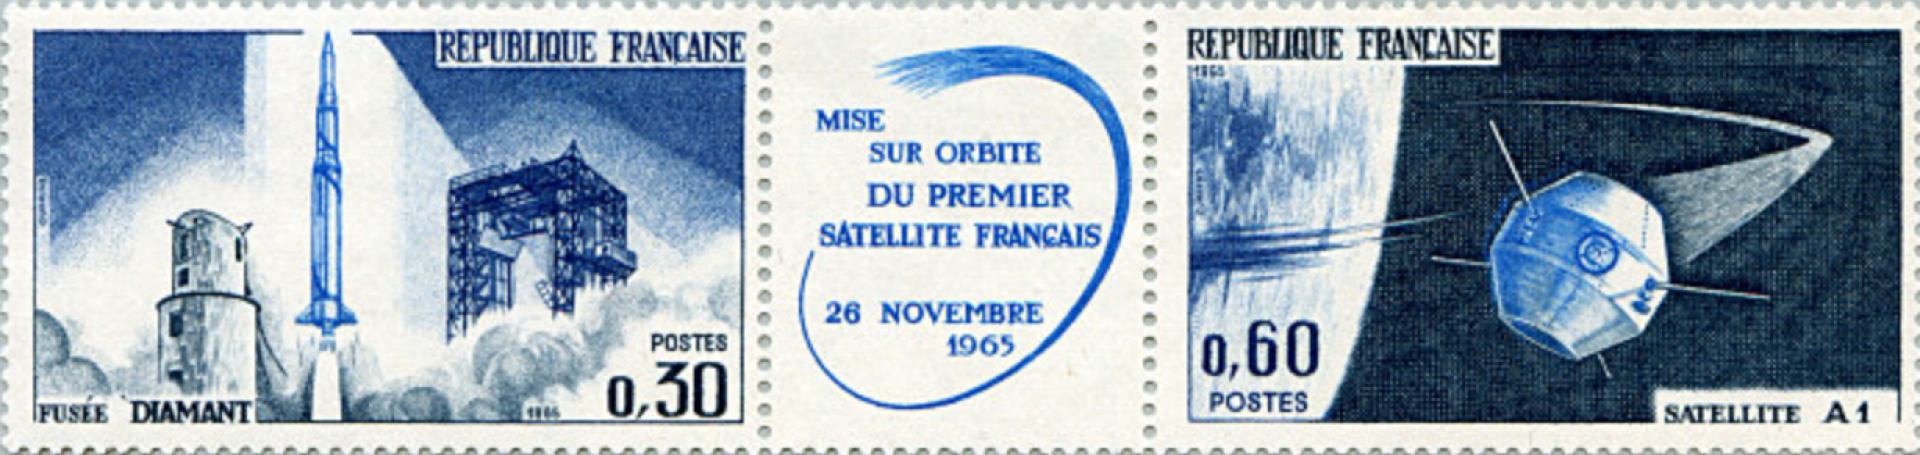 Stamps published in 1965, drawn and engraved by Claude Durrens.